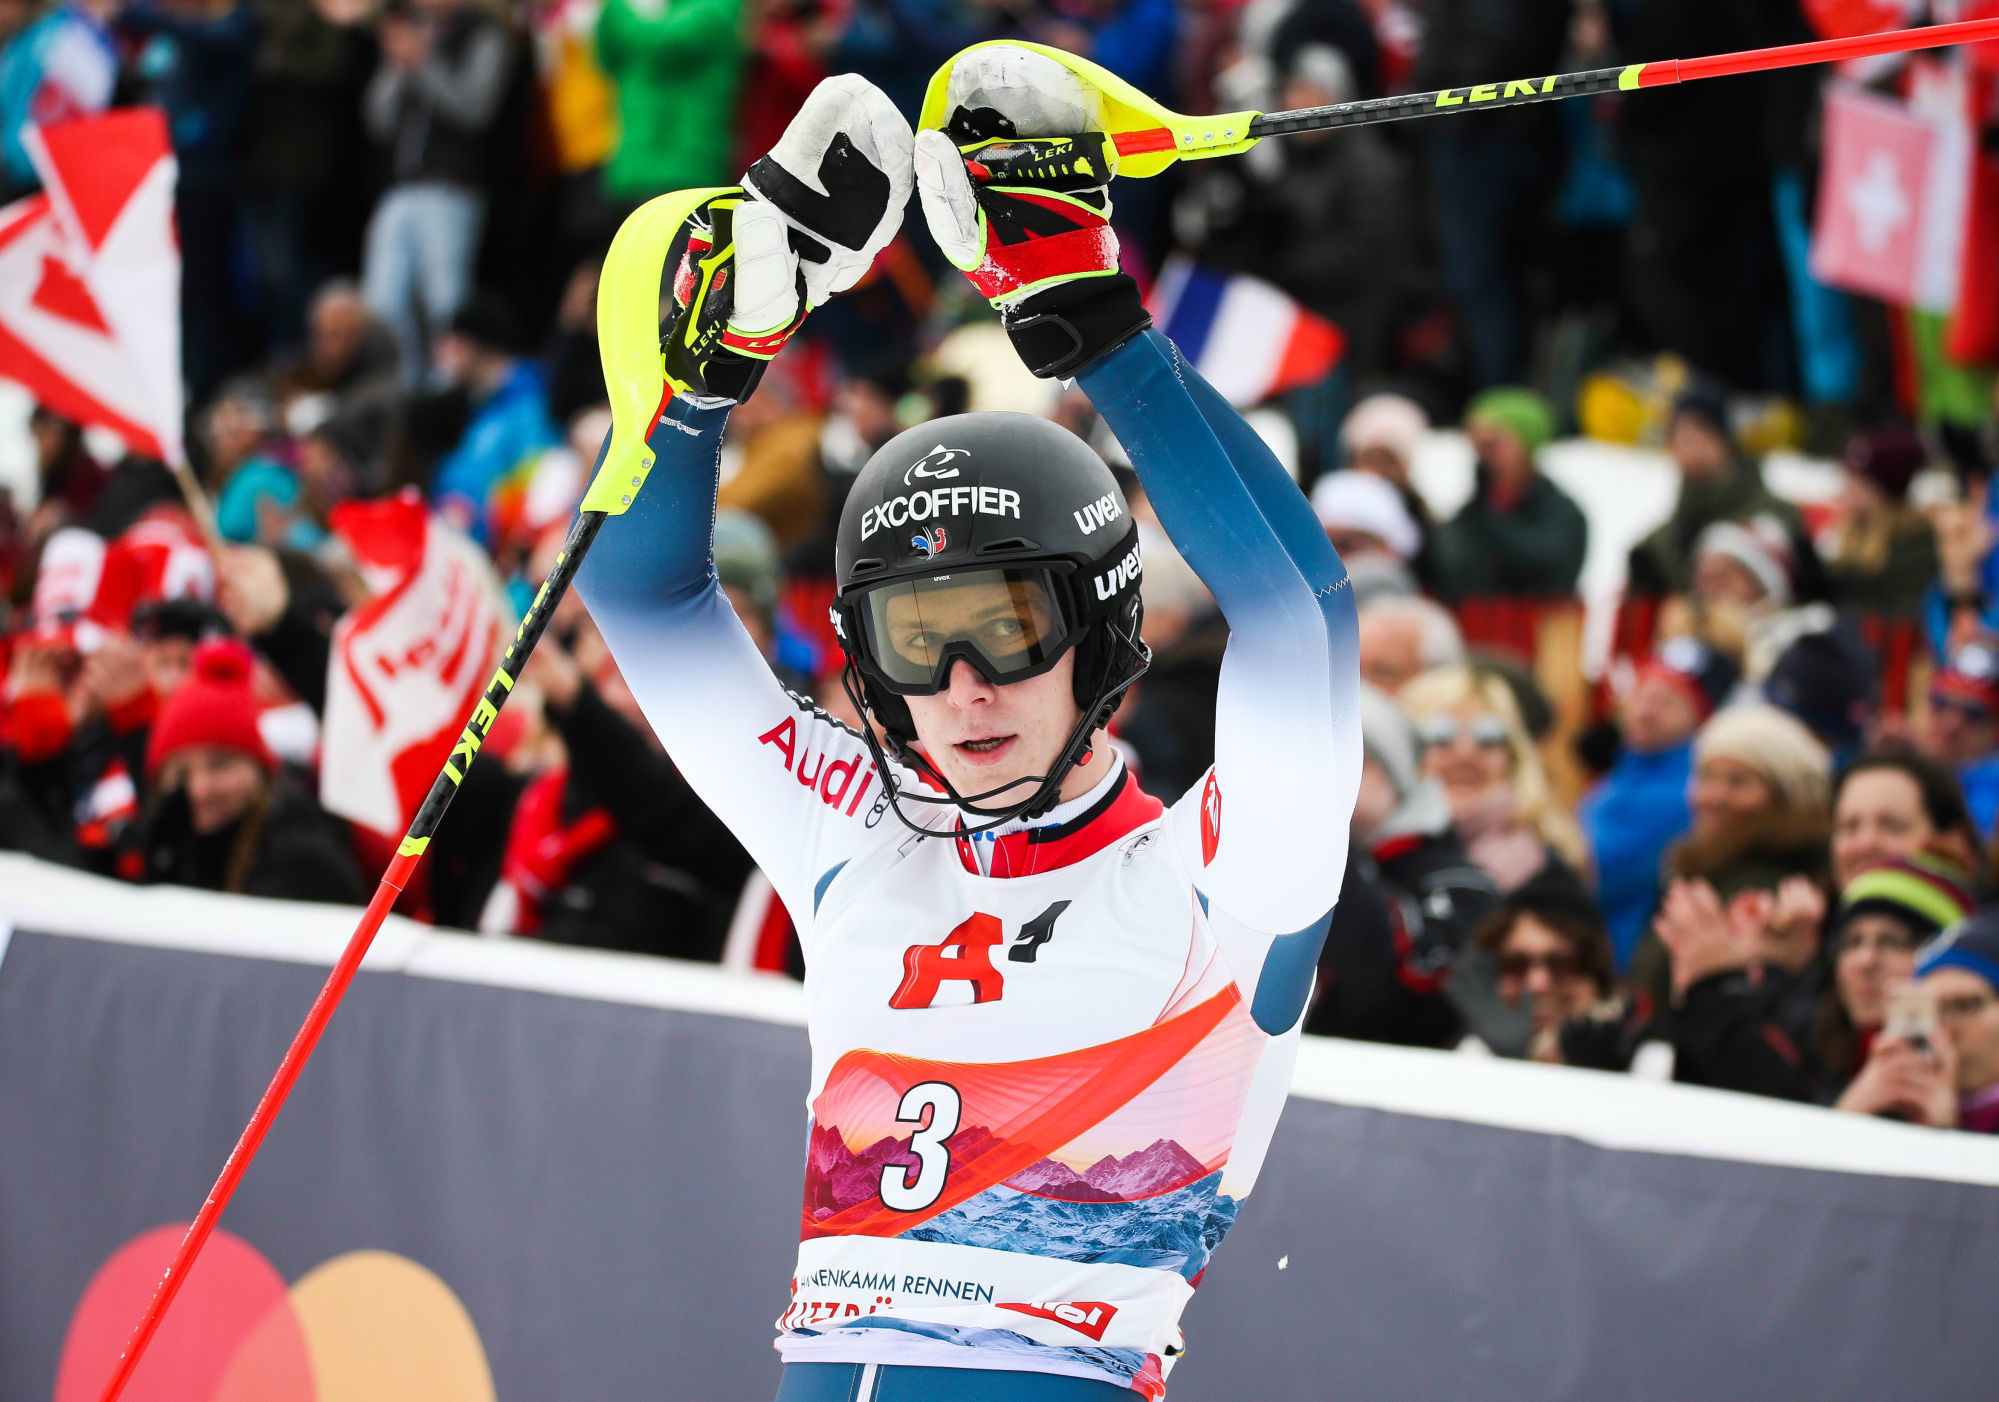 Clement Noel (FRA). Photo: GEPA pictures/ Wolfgang Grebien / Icon Sport